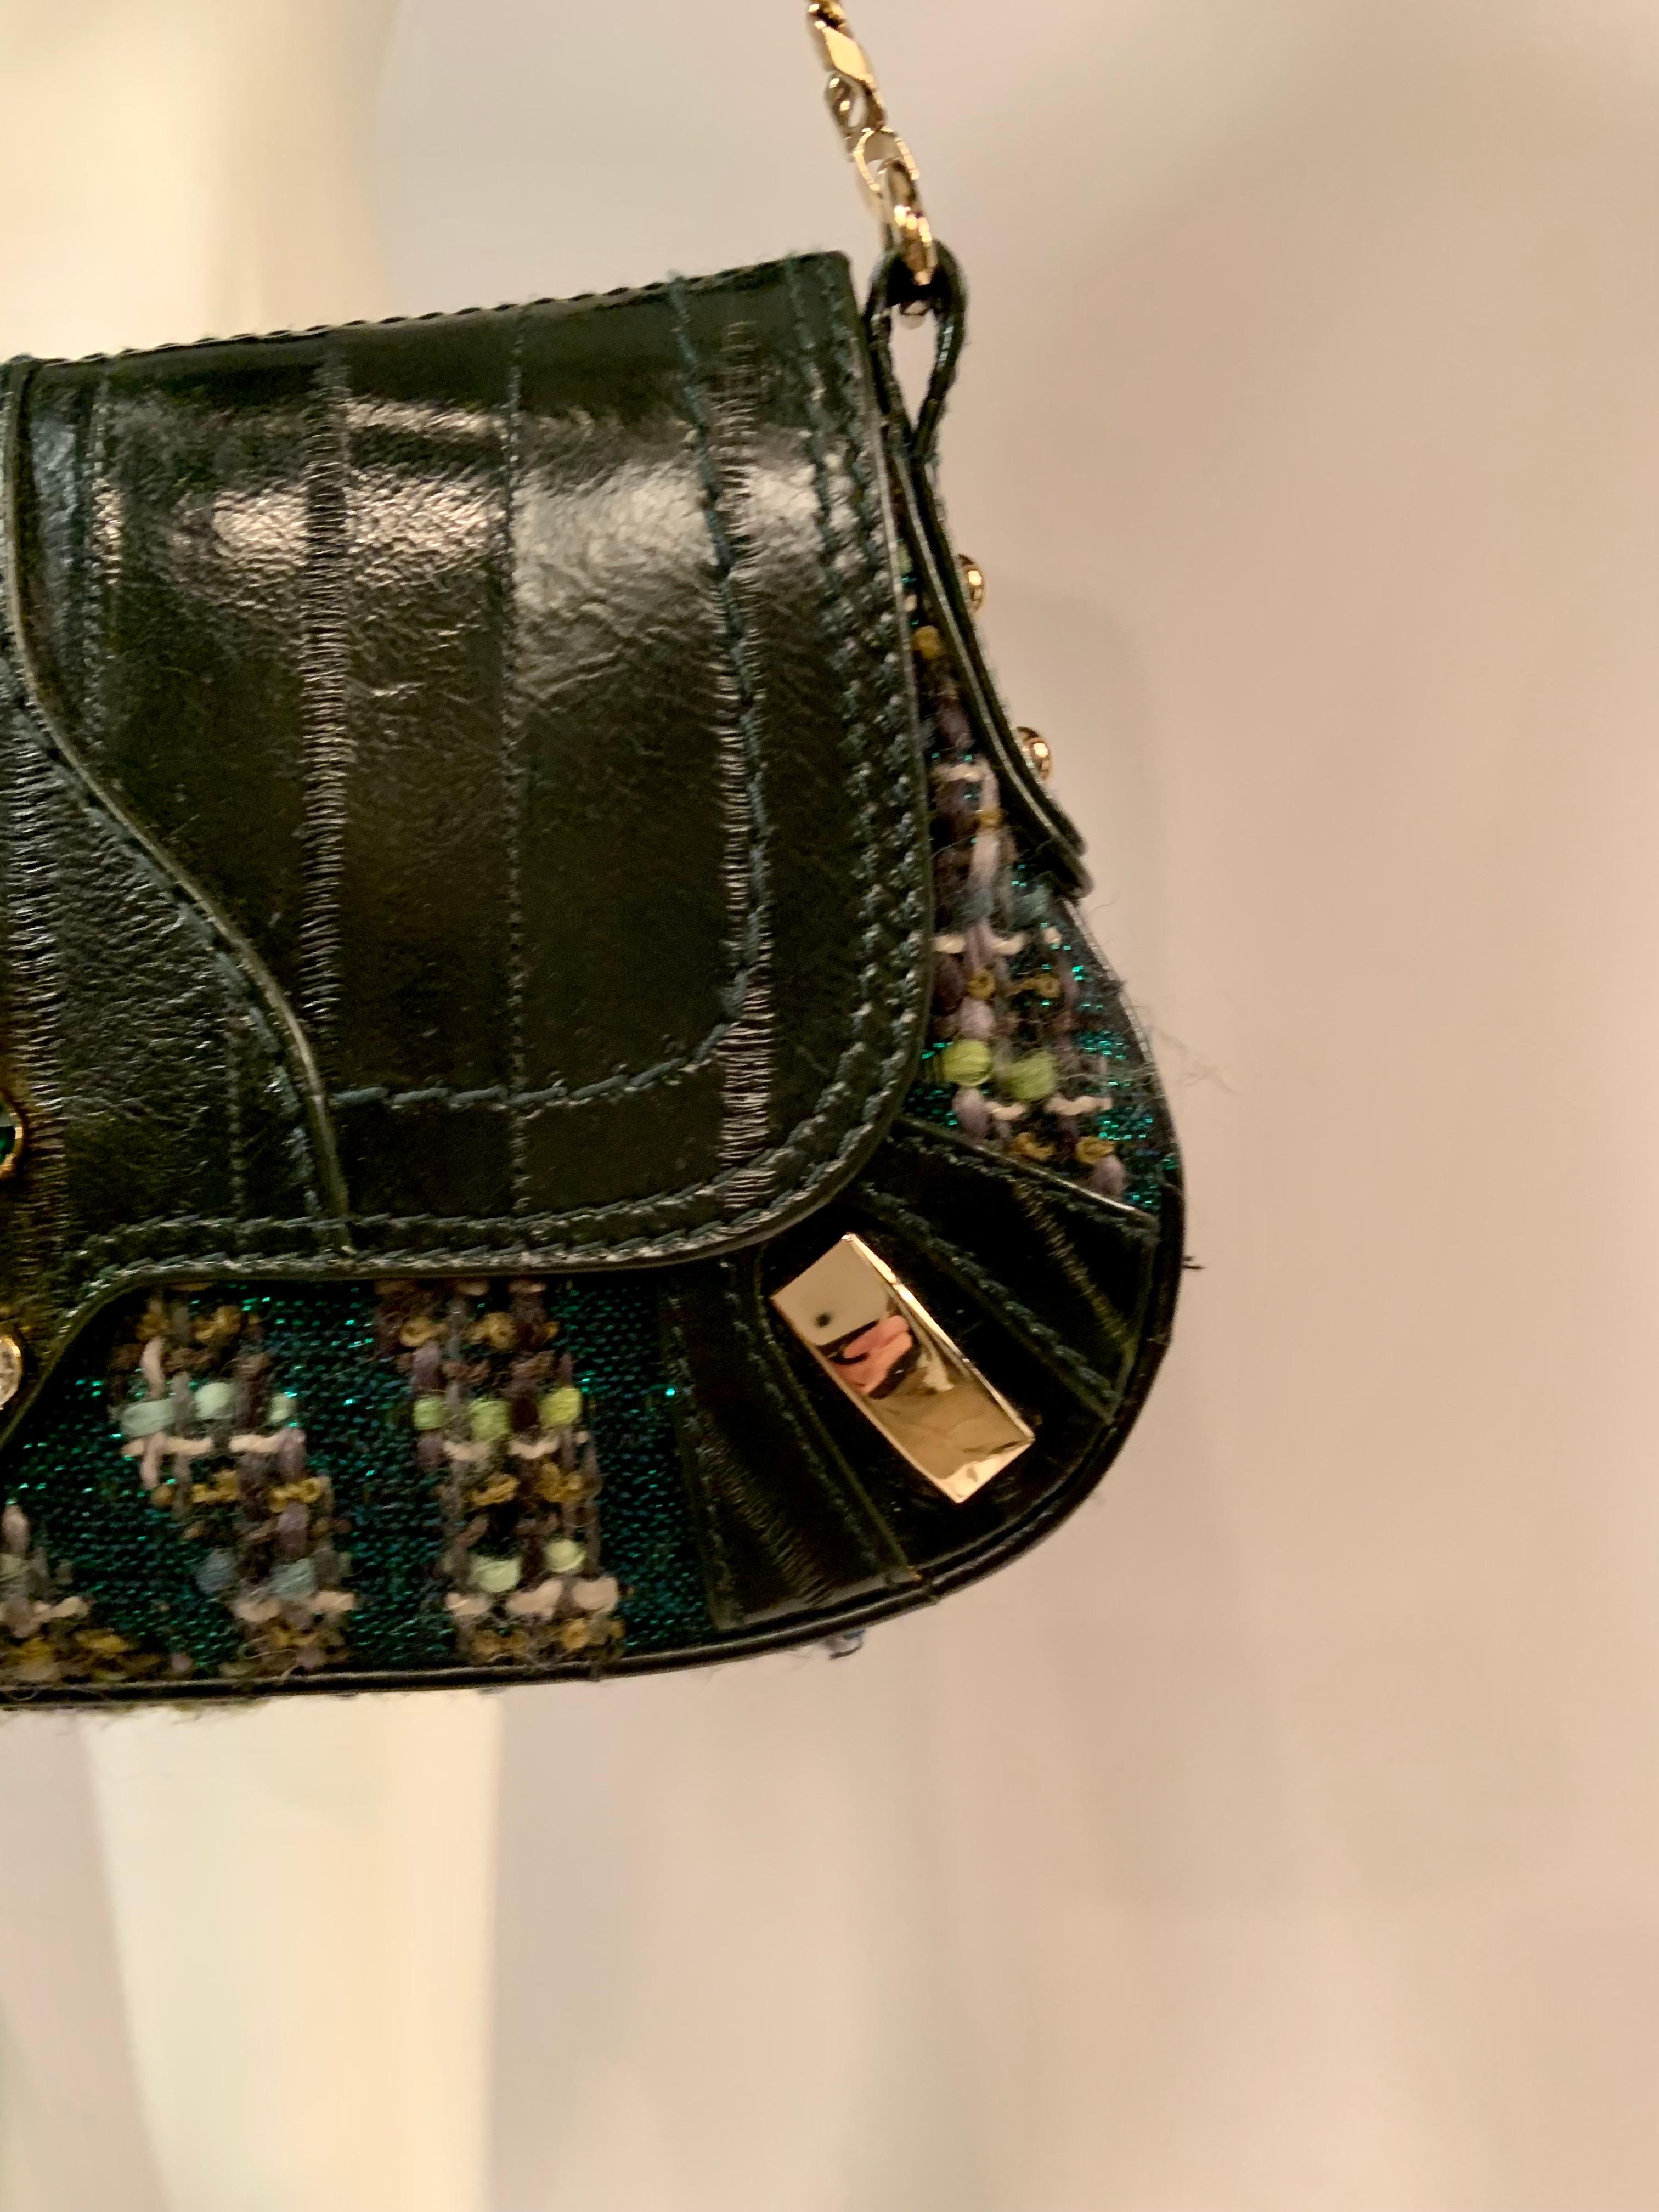 Dolce & Gabbana Green Leather and Tweed Bag with Oversized Jewel Clasp For Sale 1